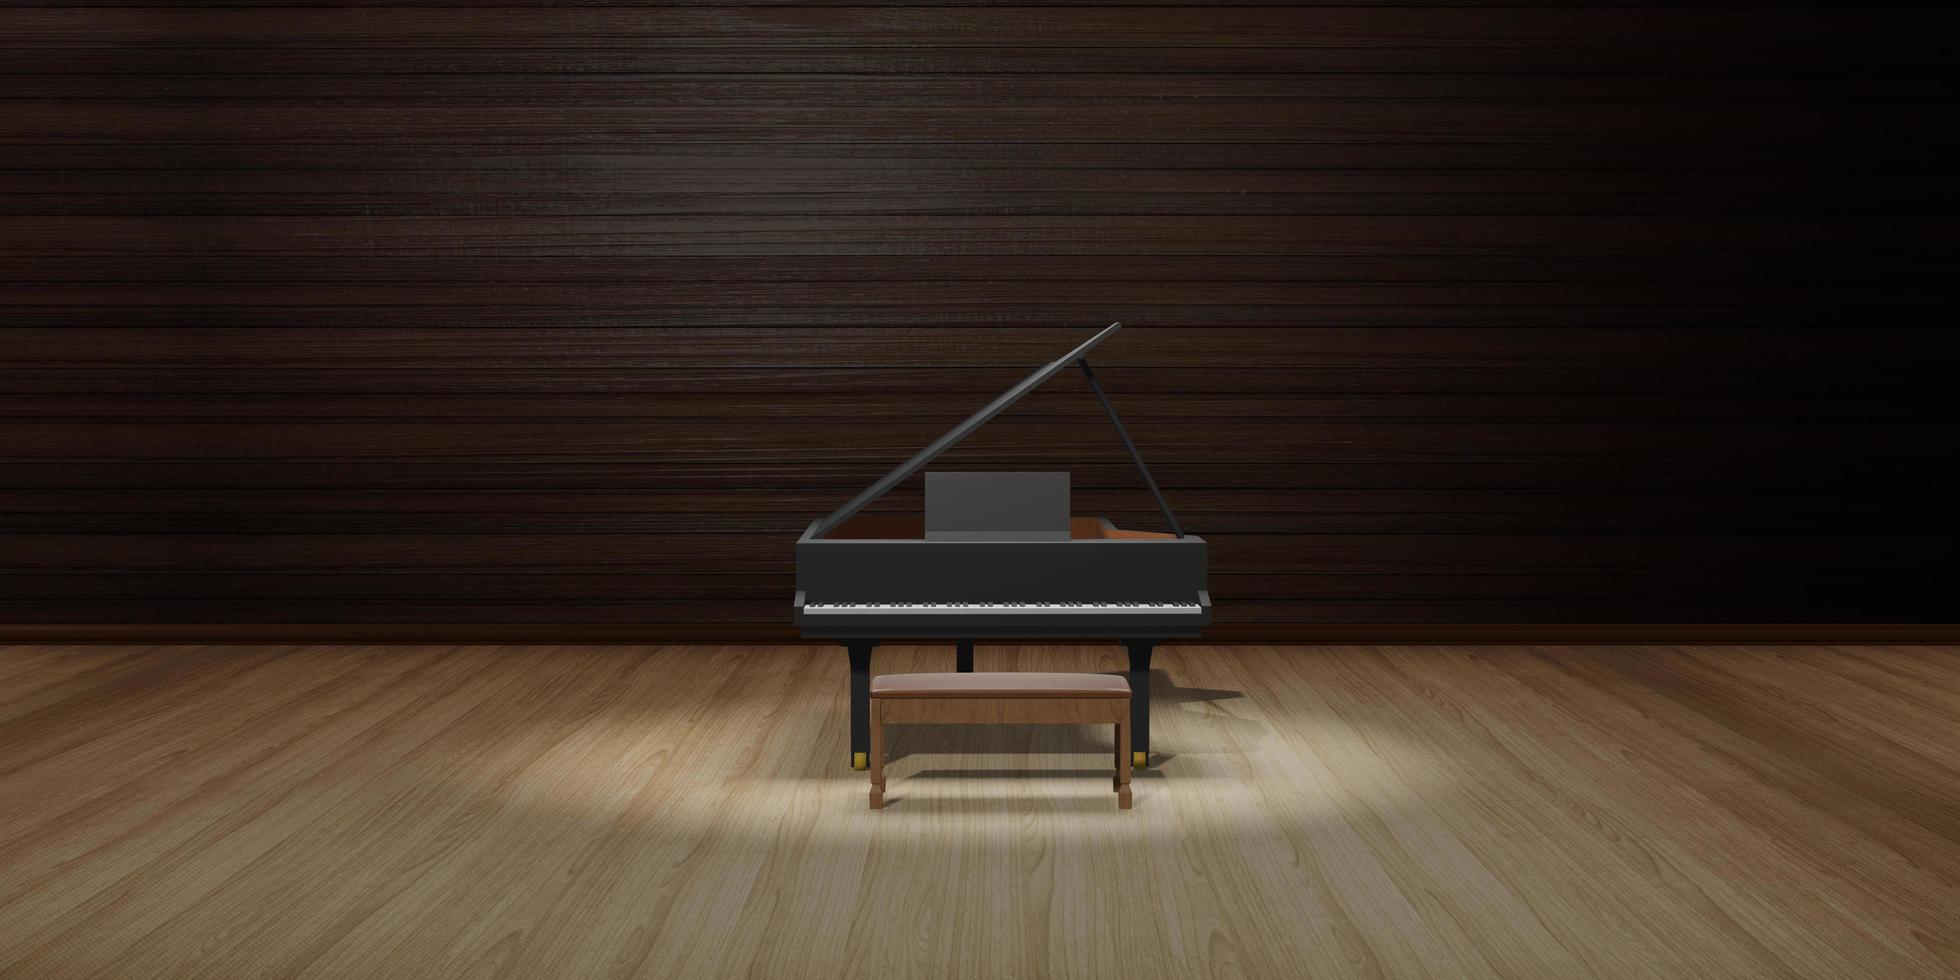 Piano on stage wooden floor and lighting 3D illustration photo